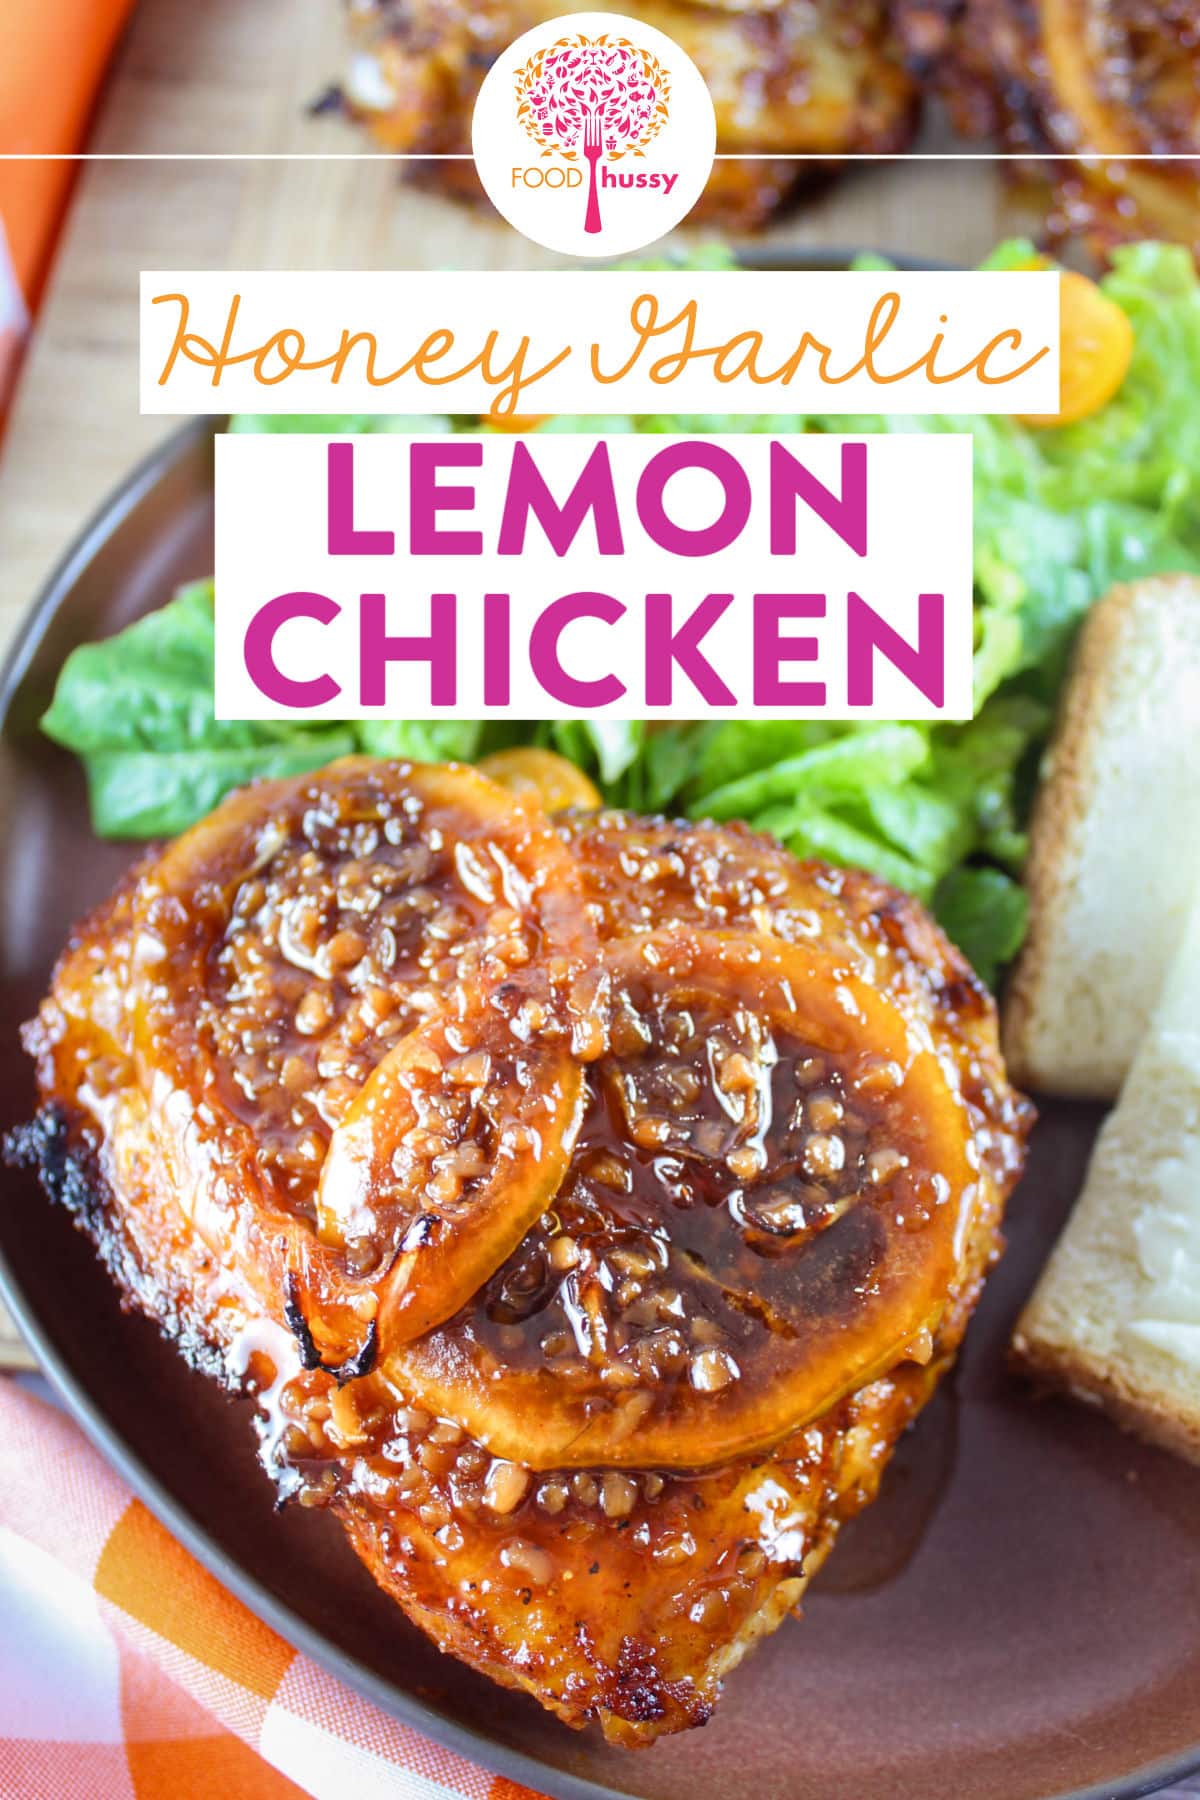 These Honey Garlic Lemon Pepper Chicken Thighs will have you licking your fingers between bites! You've got sweet, tart, savory and everything in between - in every bite! Perfect with a side of rice and veggies for a busy weeknight meal. via @foodhussy